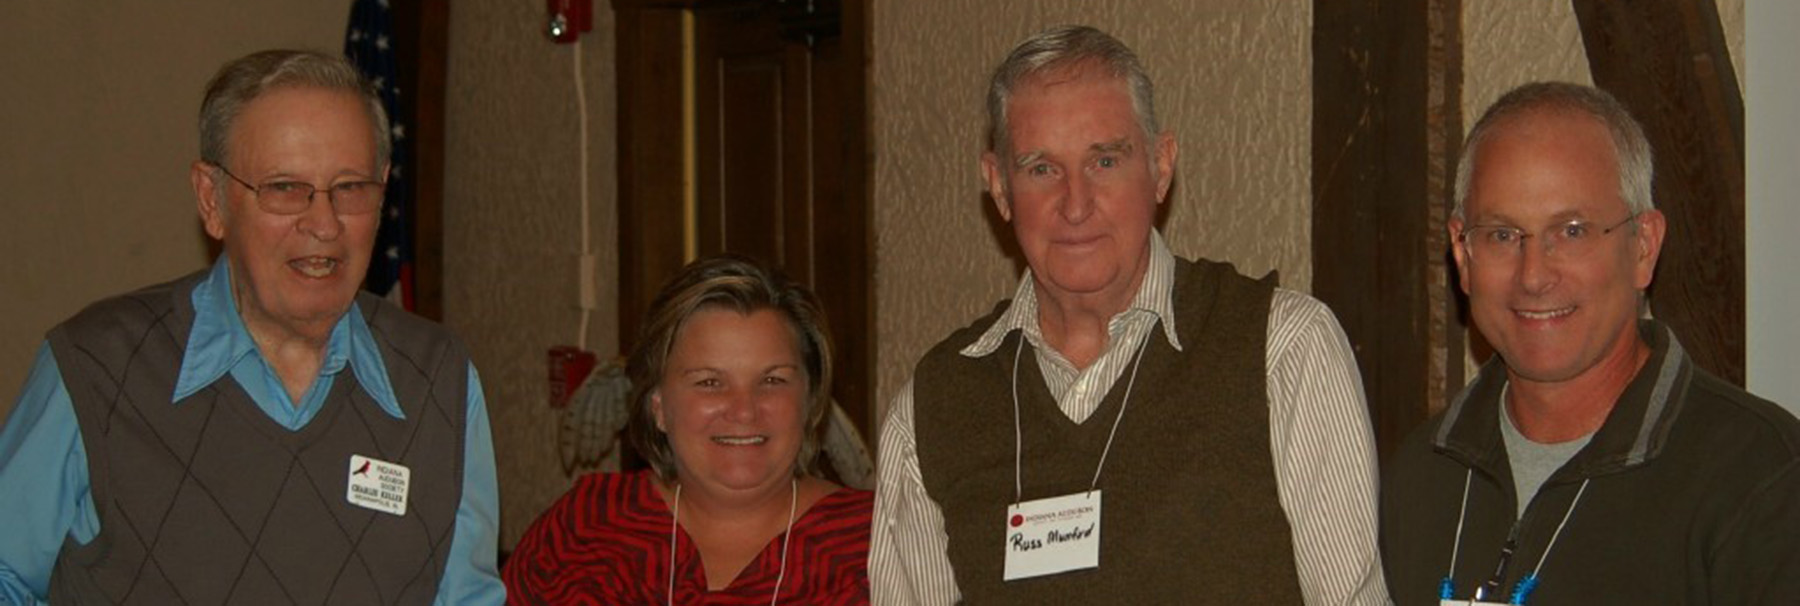 Dr. Russell Mumford pictured with (Left to Right) Charles Keller,  Amy Wilms and Carl Wilms at an Indiana Audubon Society meeting in 2010.